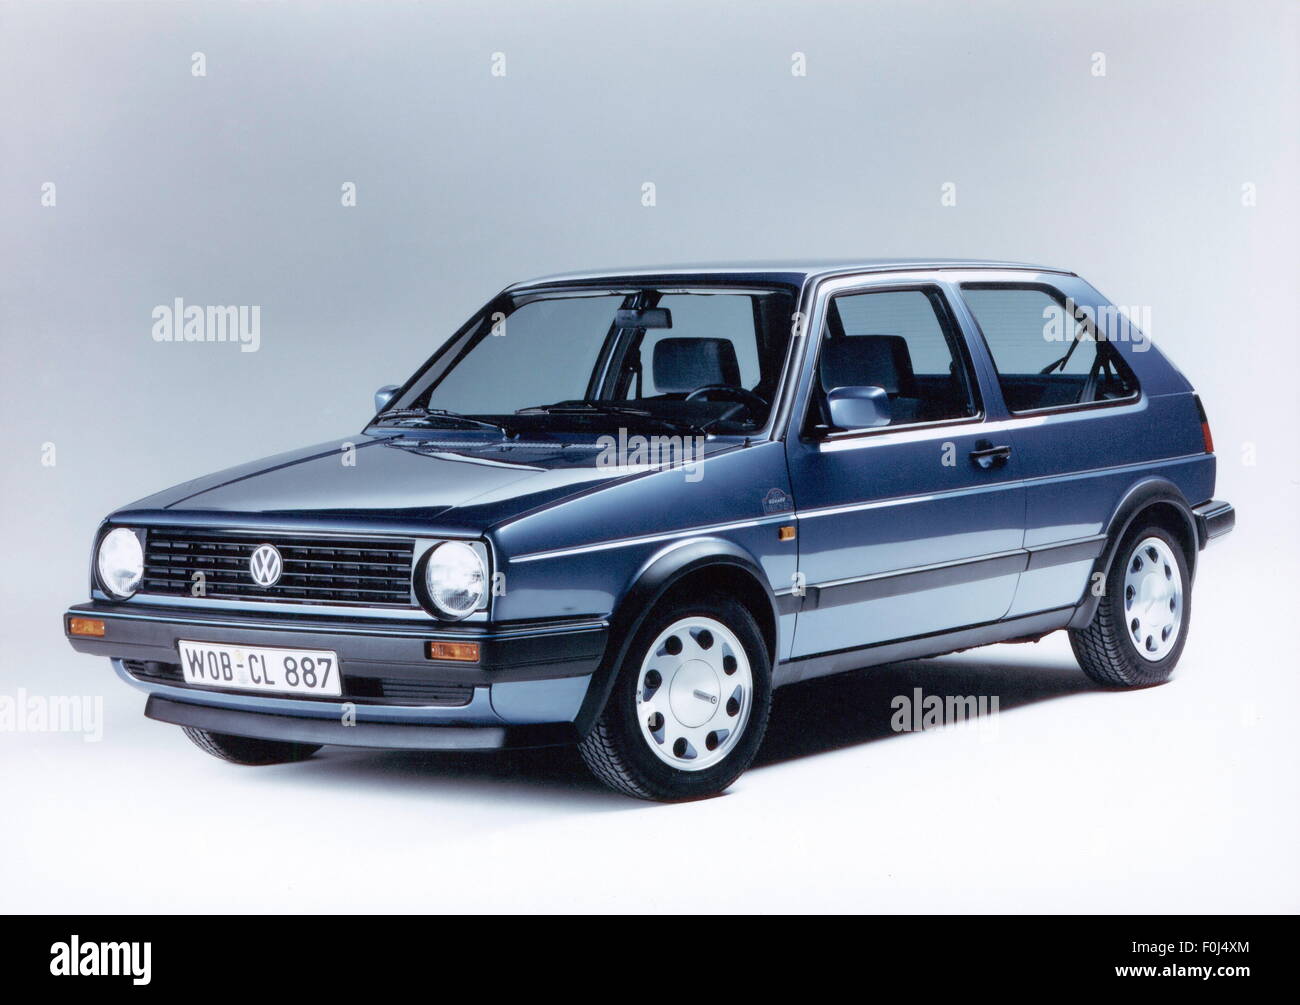 transport, car, vehicle variants, Volkswagen, VW Golf Mk2 CL, 1990,  Additional-Rights-Clearences-Not Available Stock Photo - Alamy